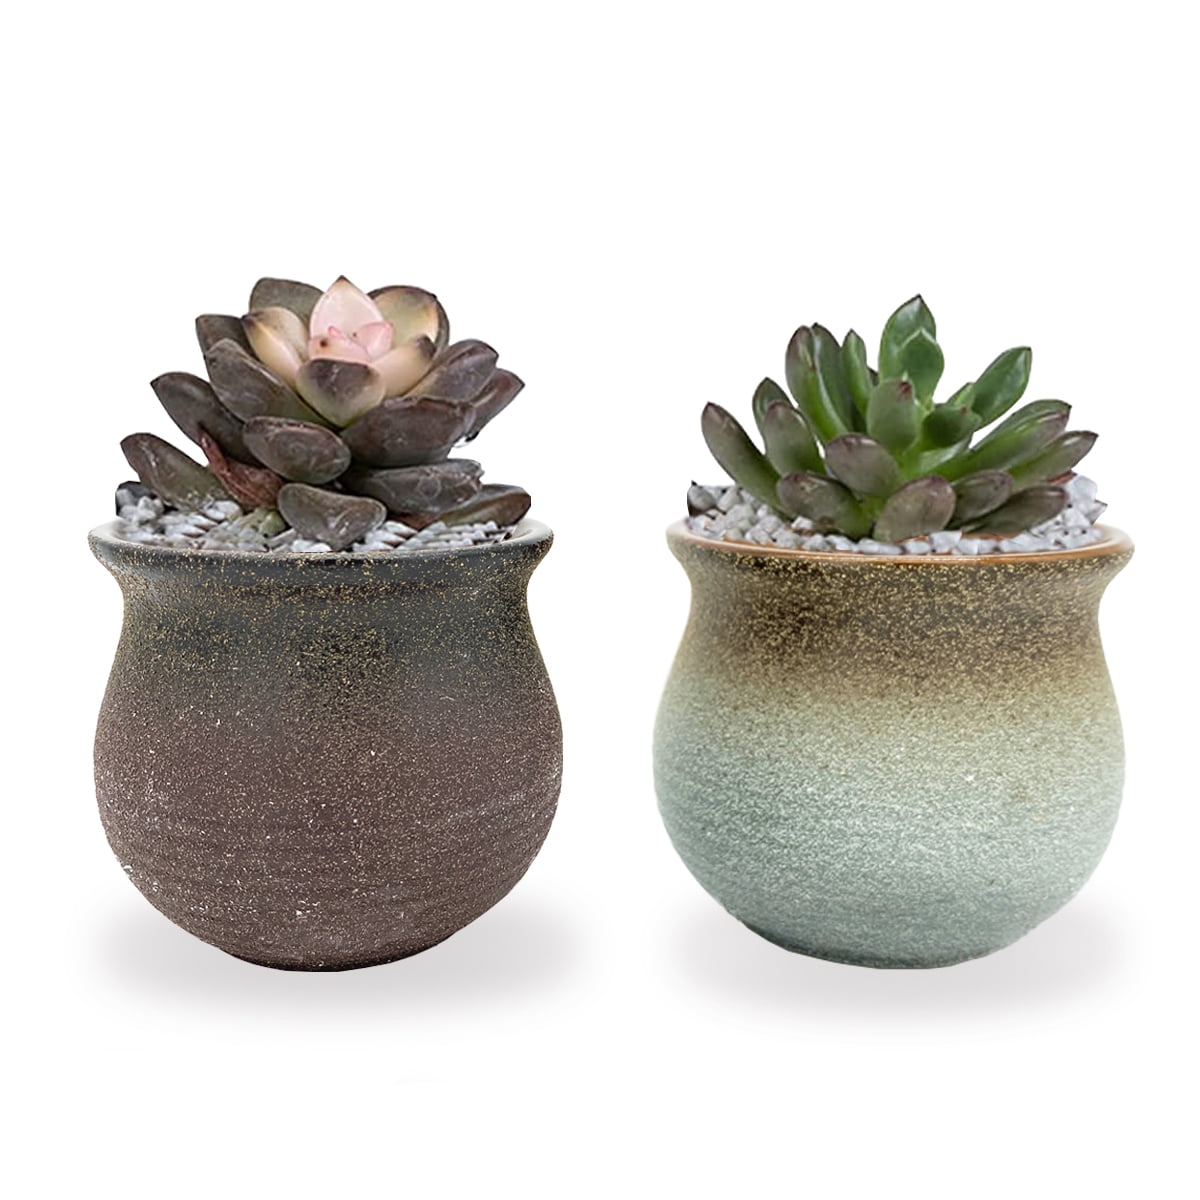 4.5 inch Modern Round Ceramic Succulent Planter Cactus Pots with Drainage Hole 